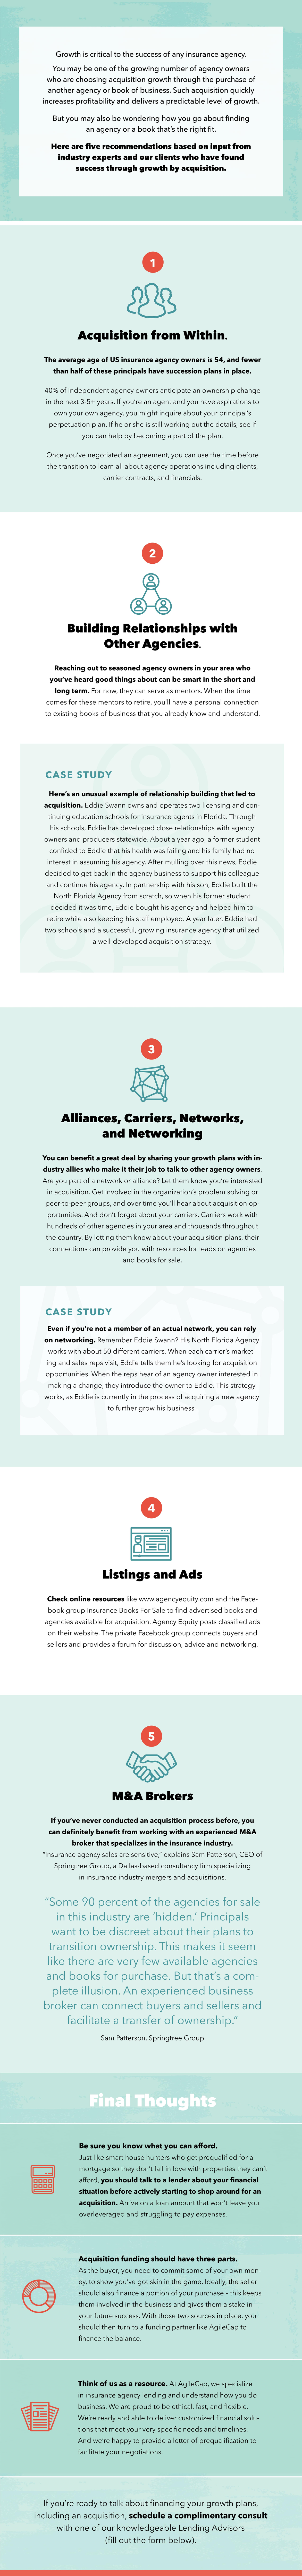 Growth is critical to the success of any insurance agency infographic